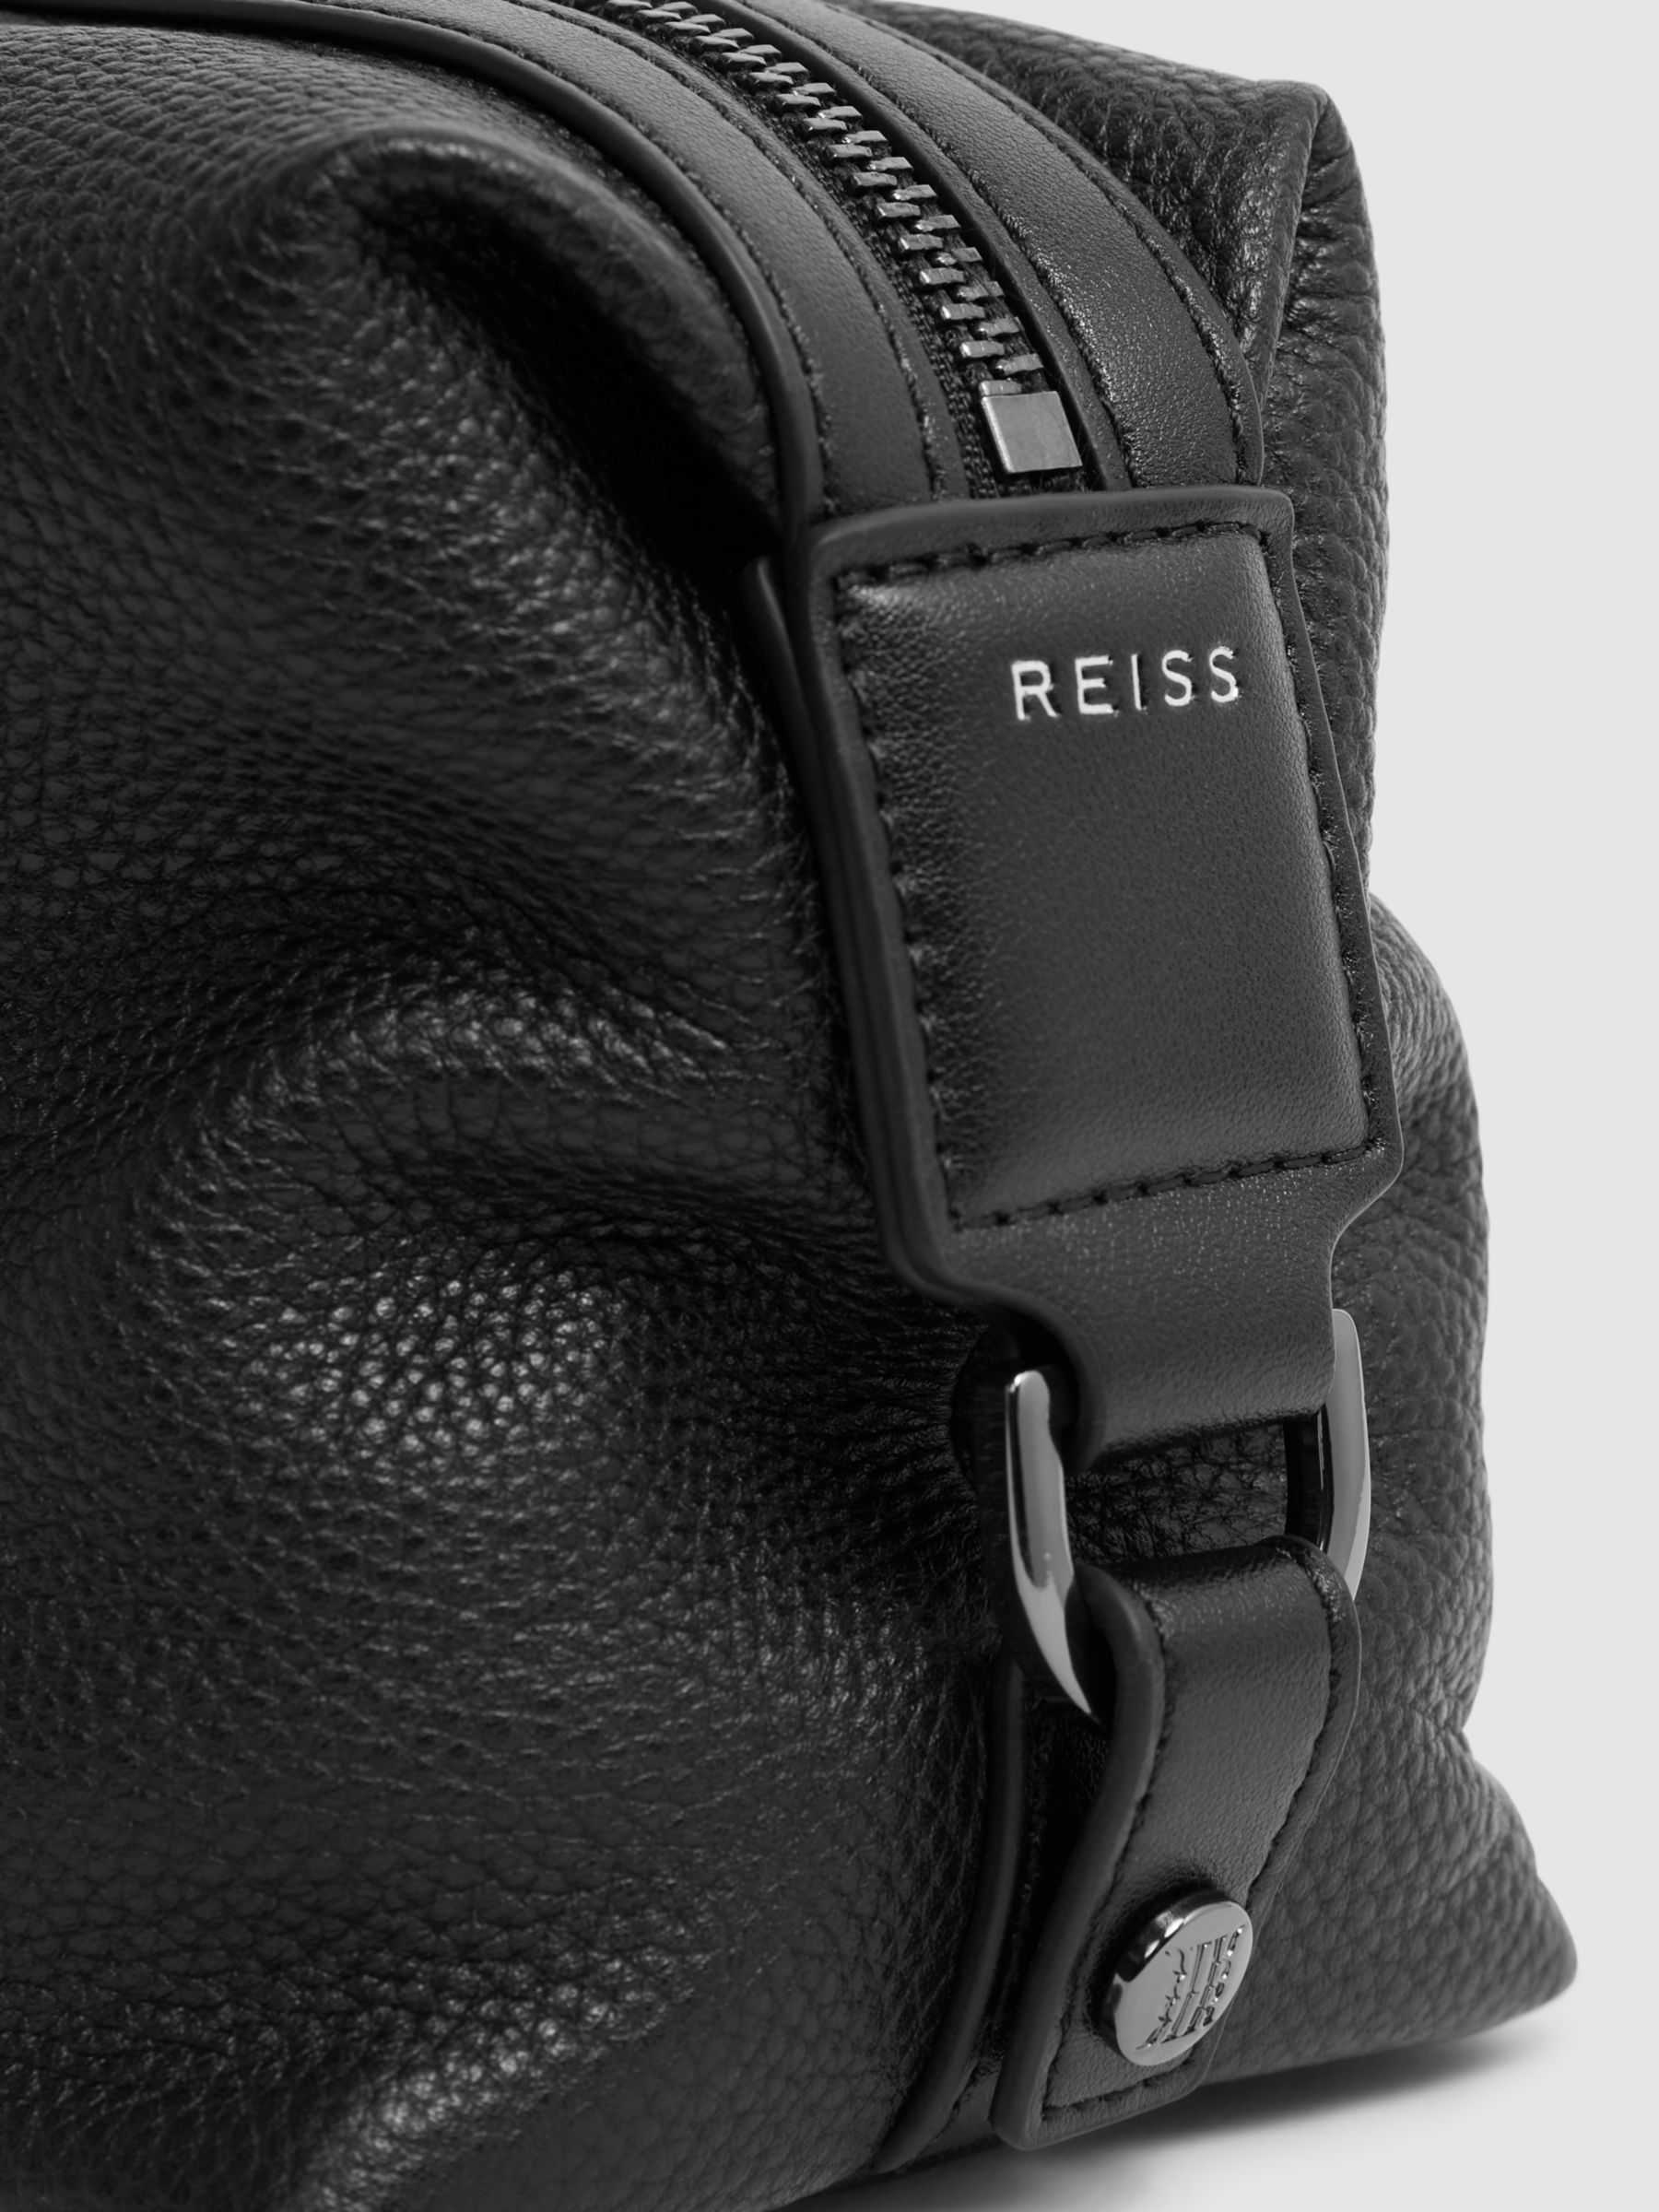 Buy Reiss Cole Leather Wash Bag Online at johnlewis.com